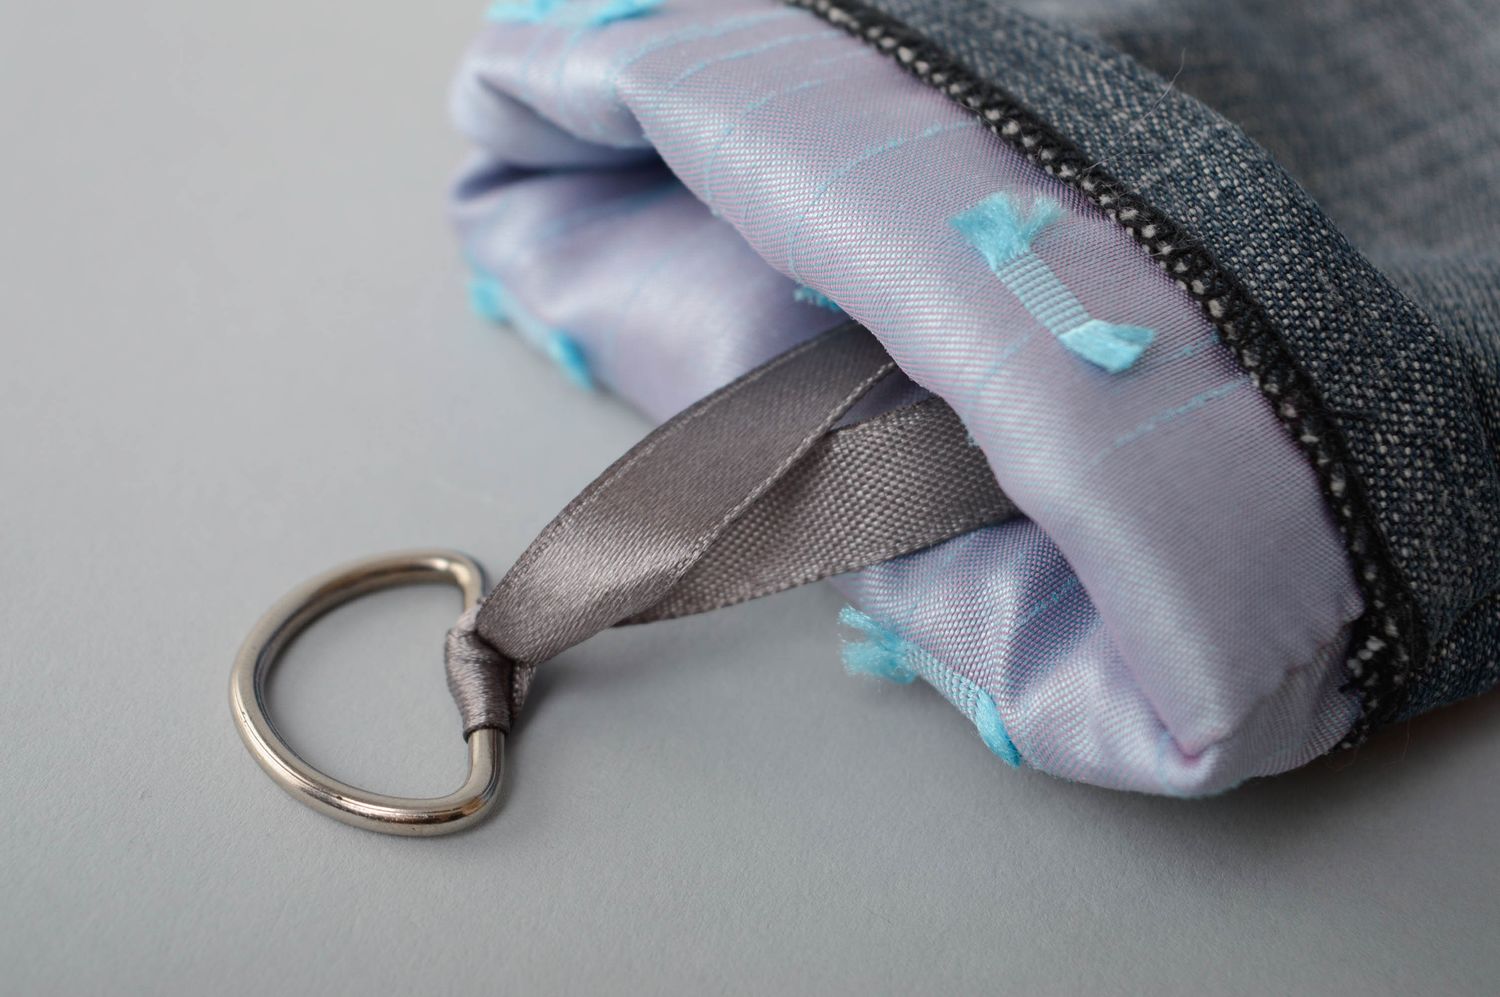 Denim key case embroidered with satin ribbons photo 3